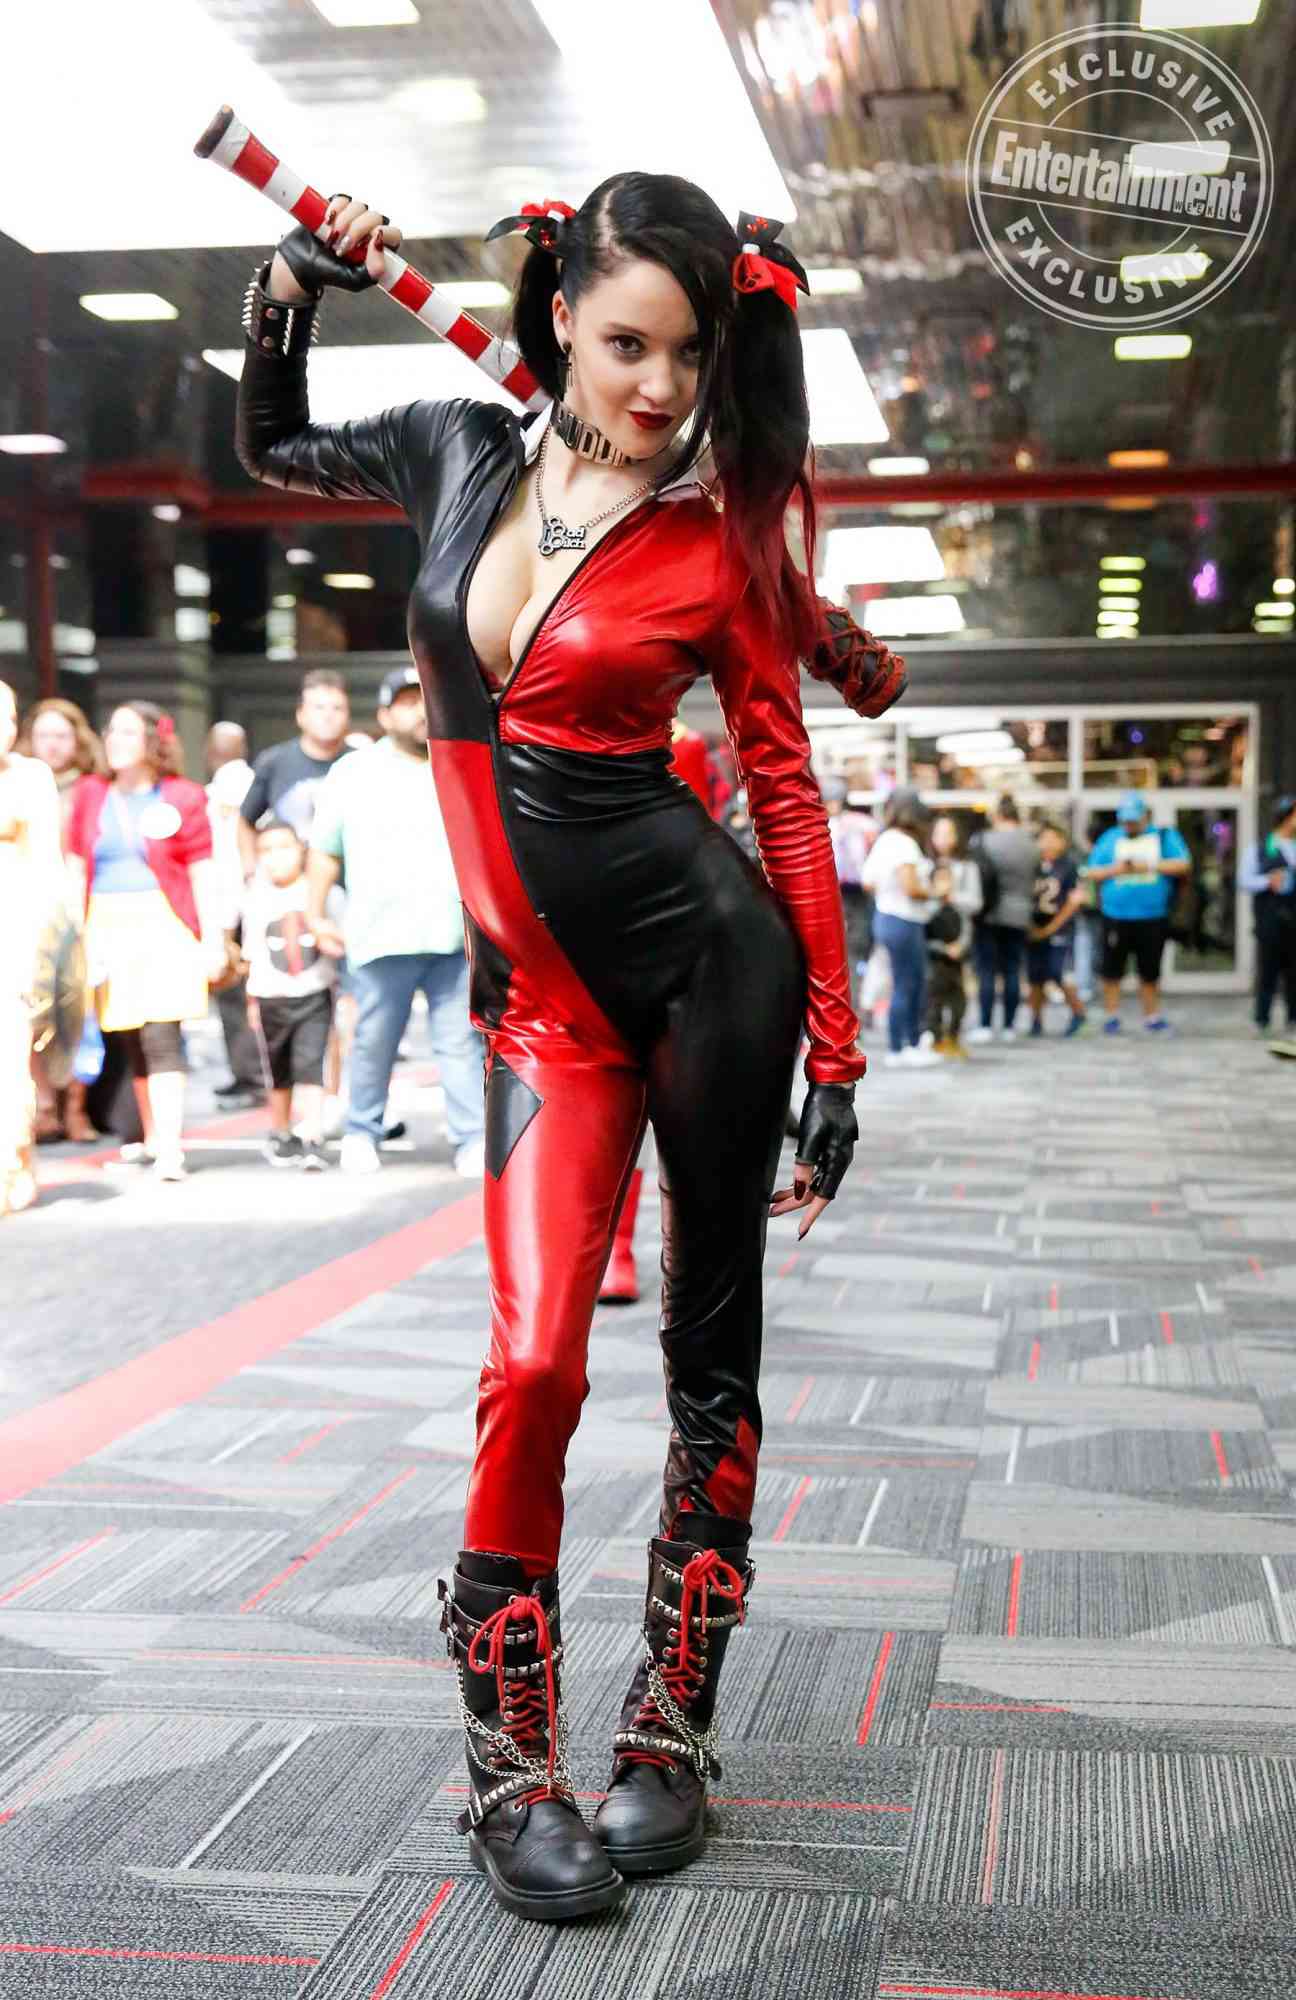 Chicago Comic-Con 2018Photographed by Chris Cosgrove for Entertainment Weekly